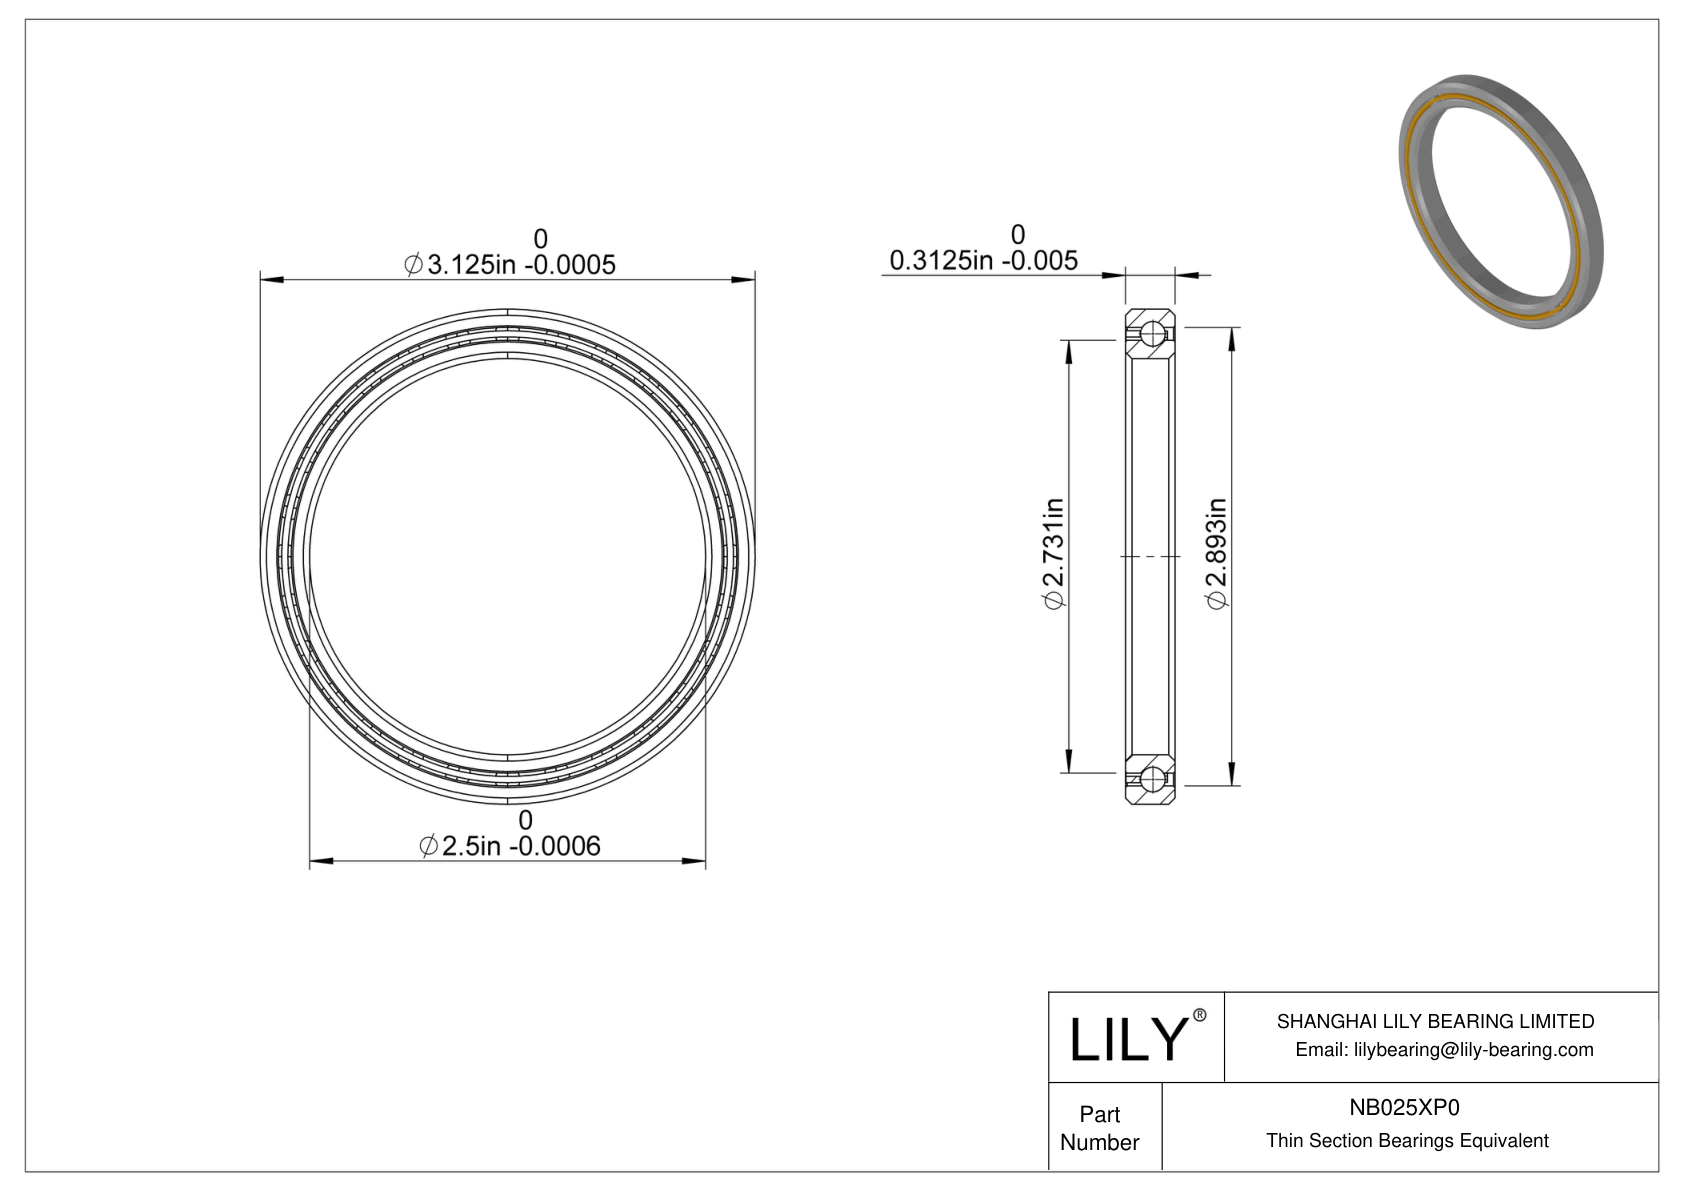 NB025XP0 Constant Section (CS) Bearings cad drawing